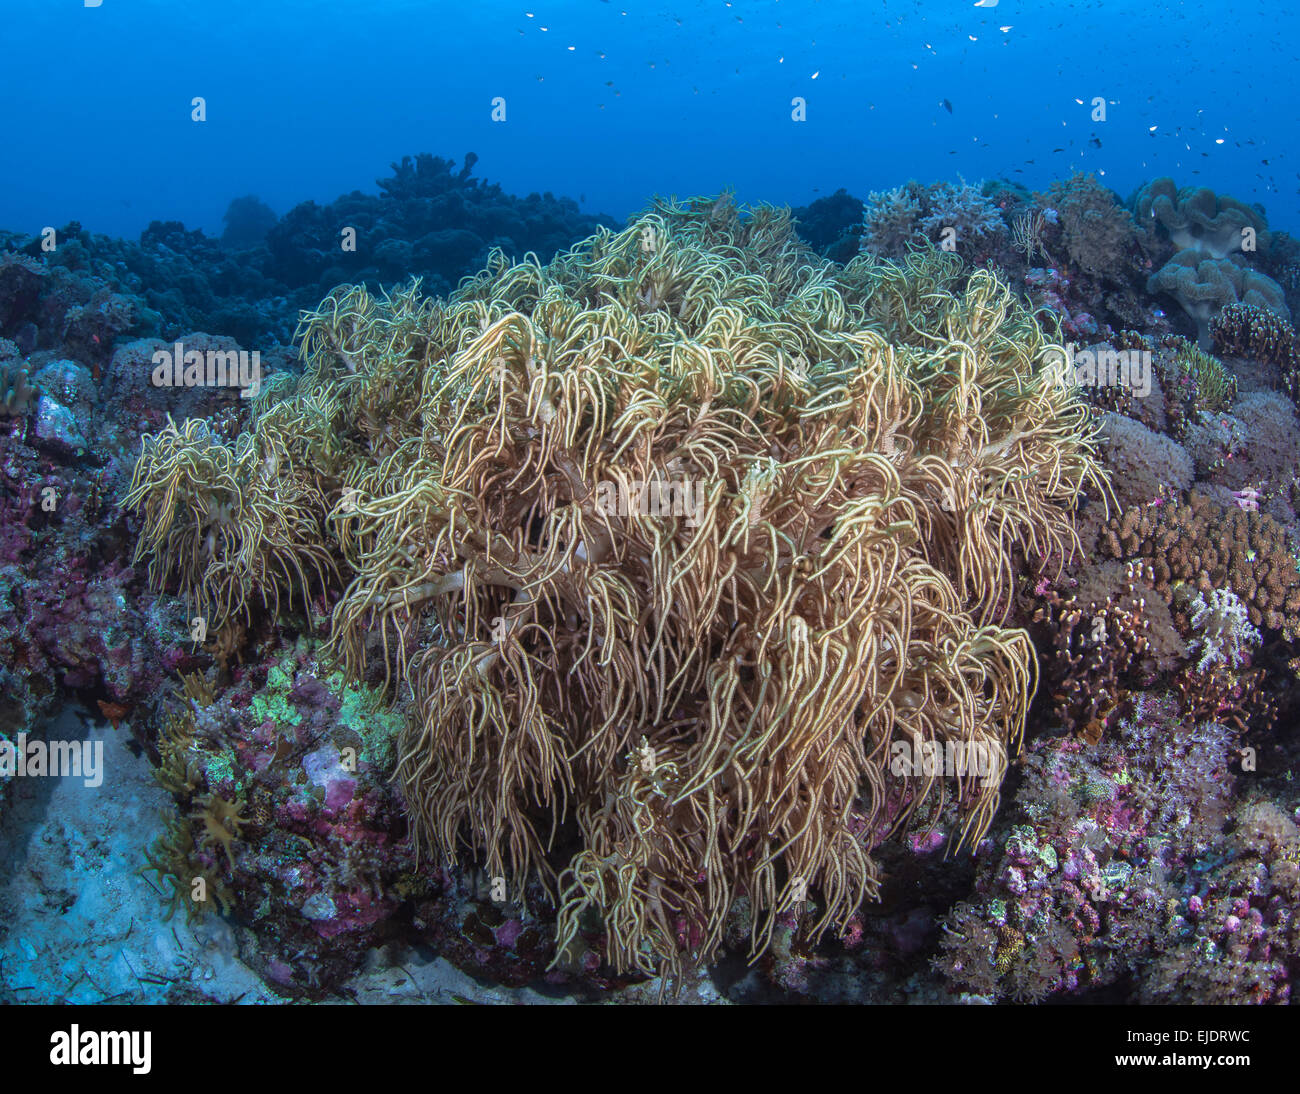 Long fingers of leather coral wavering in ocean surge. Spratly Islands, South China Sea. Stock Photo